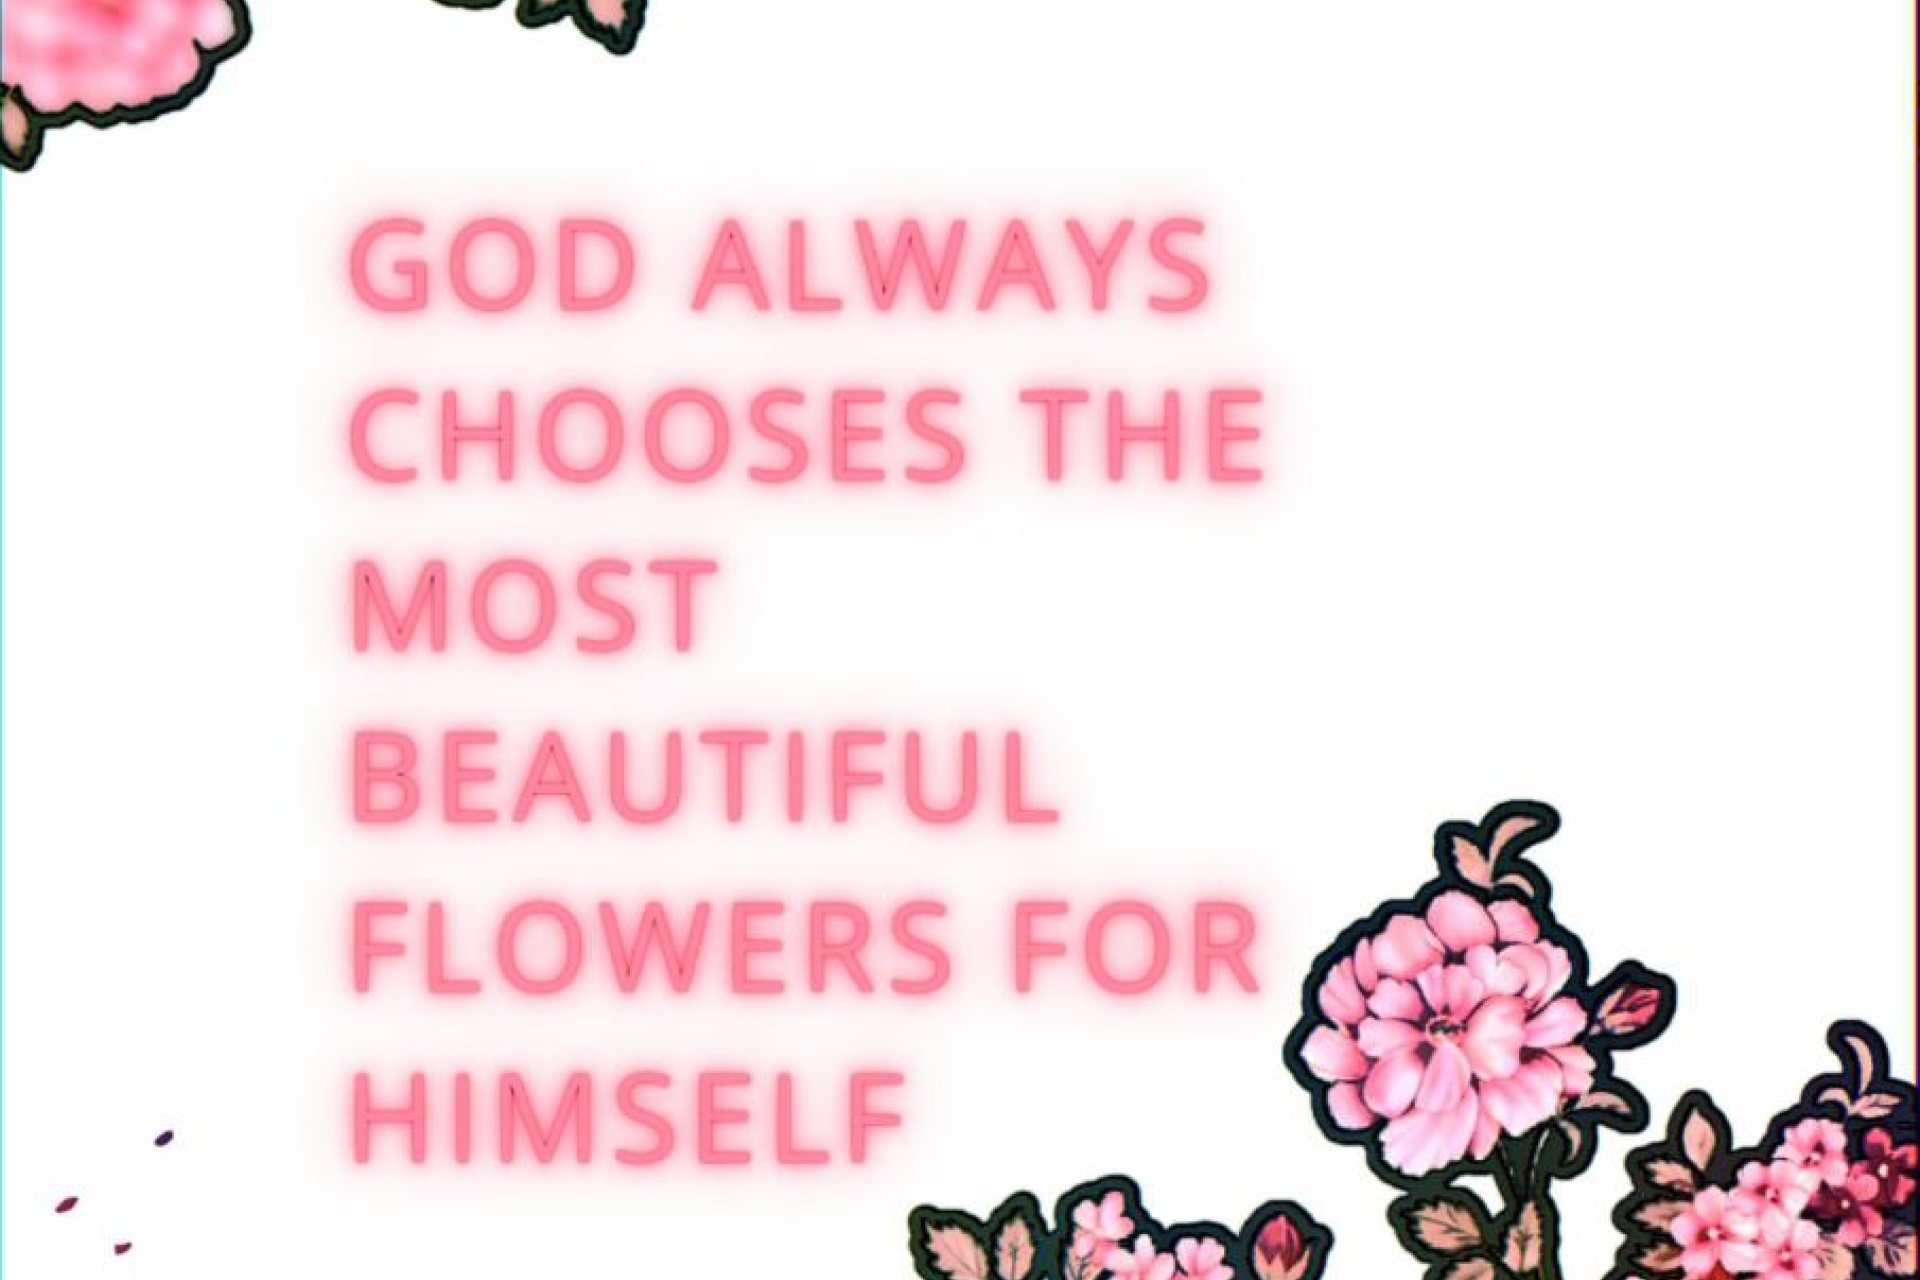 God always chooses the most beautiful flowers for himself